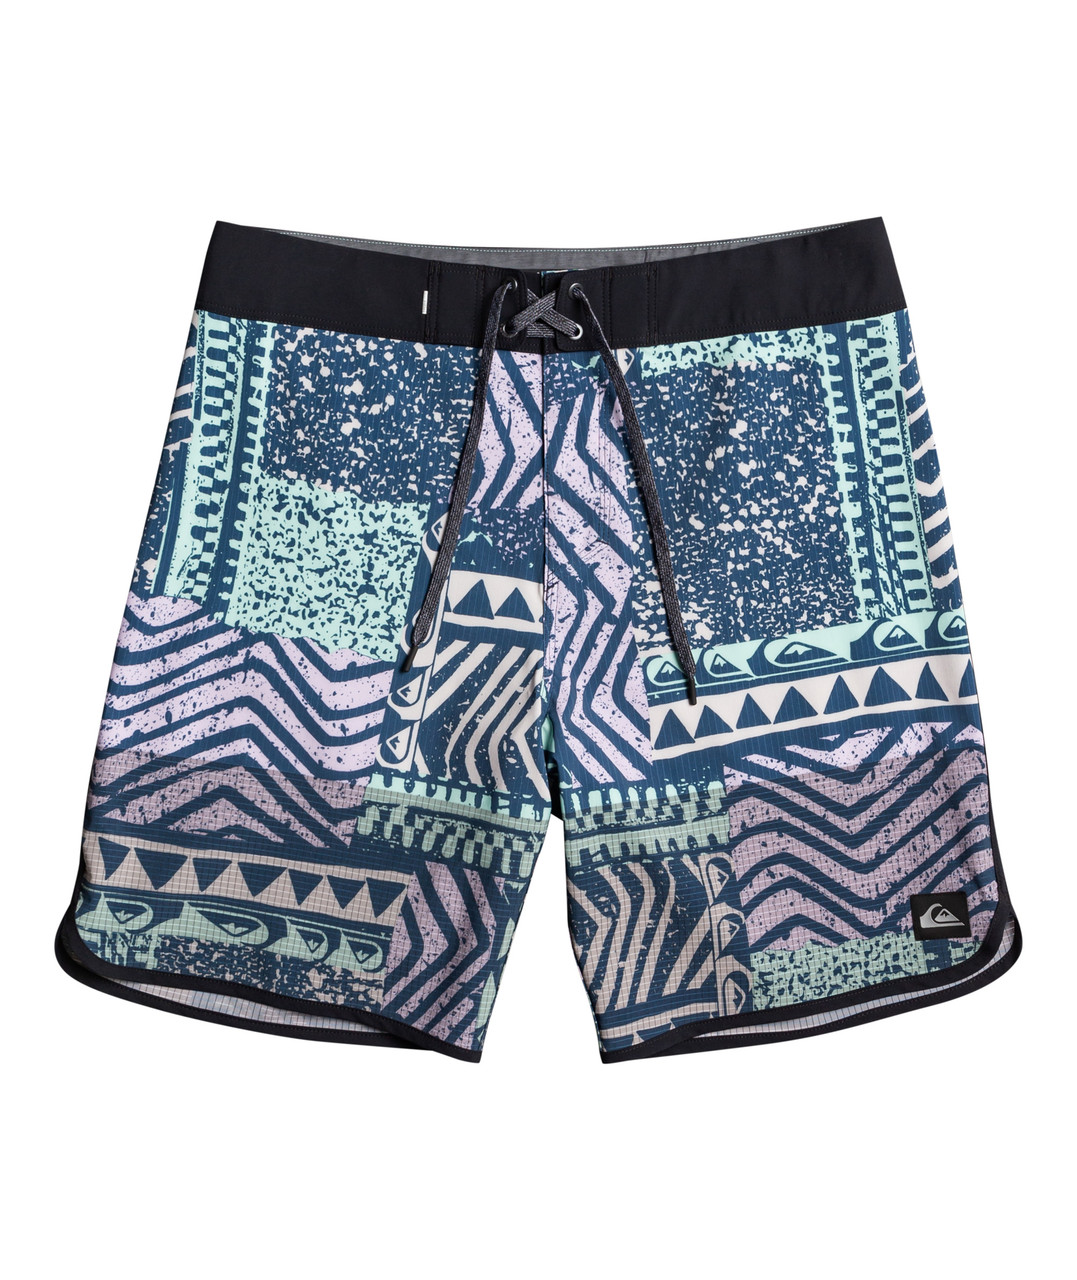 omvang Overjas Crack pot Quiksilver Highlite Scallop 19" Boardshorts Midnight Navy | WakeHouse.com